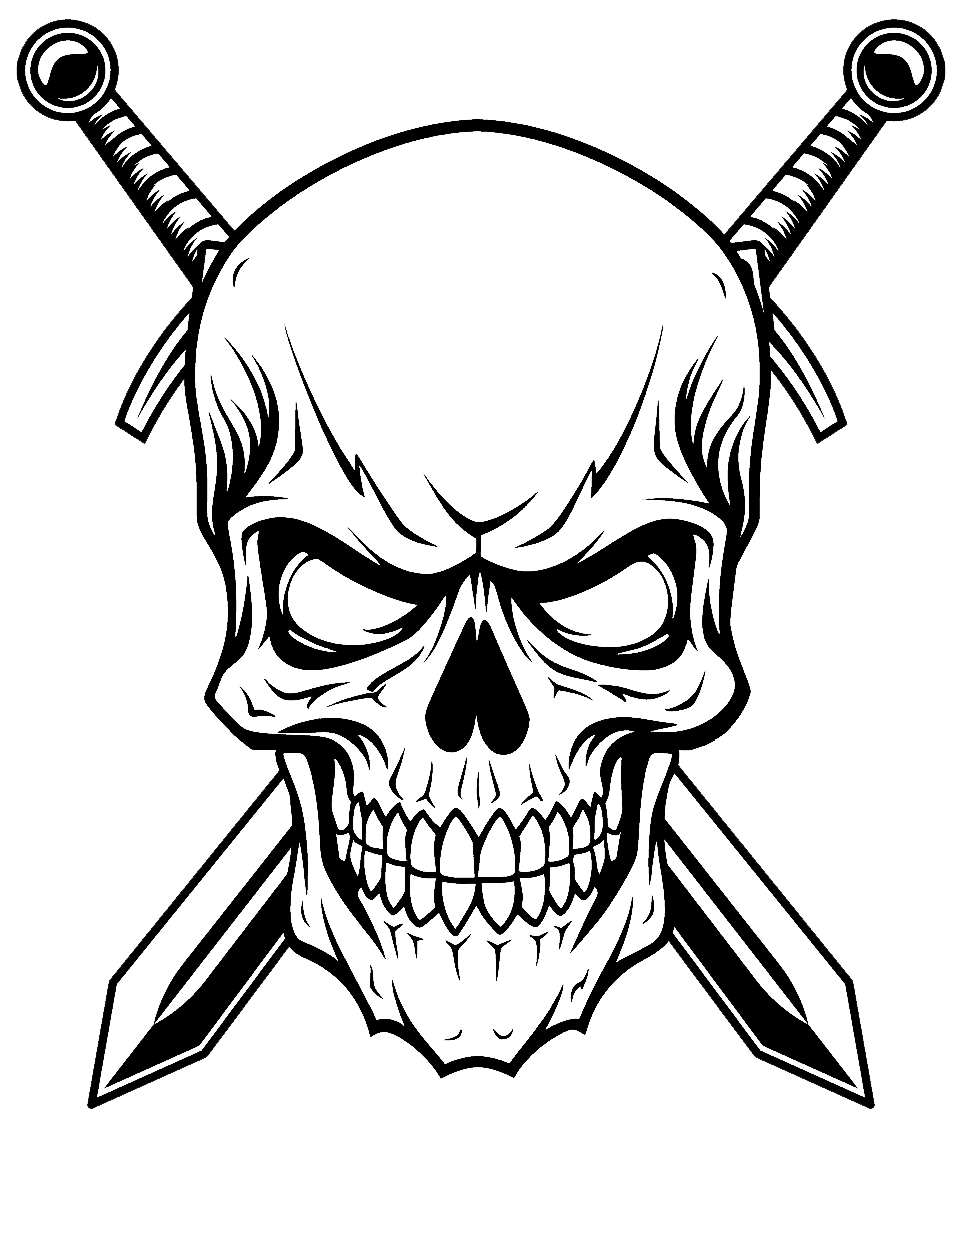 Pirate Skull and Crossbones Coloring Page - A classic pirate skull with crossed swords.